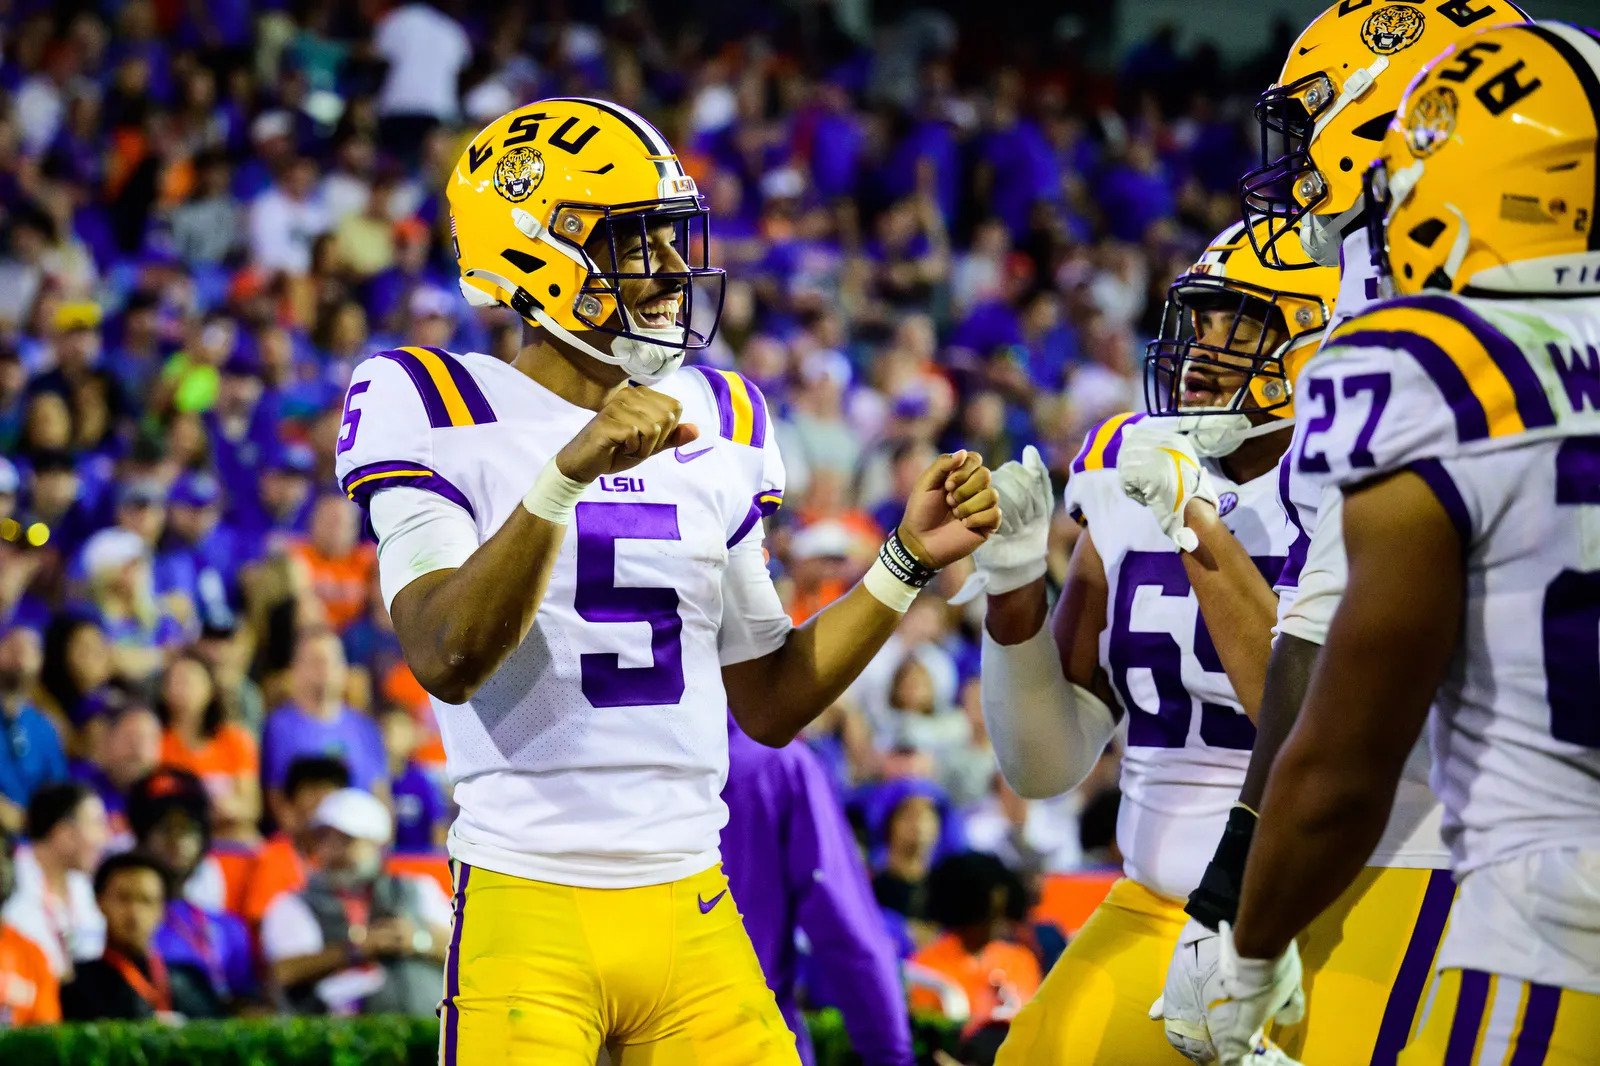 LSU’s Offense Gets To Fast Start, Jayden Daniels Puts On Masterful Performance, and More Takeaways From Bounce-Back Win Against Florida